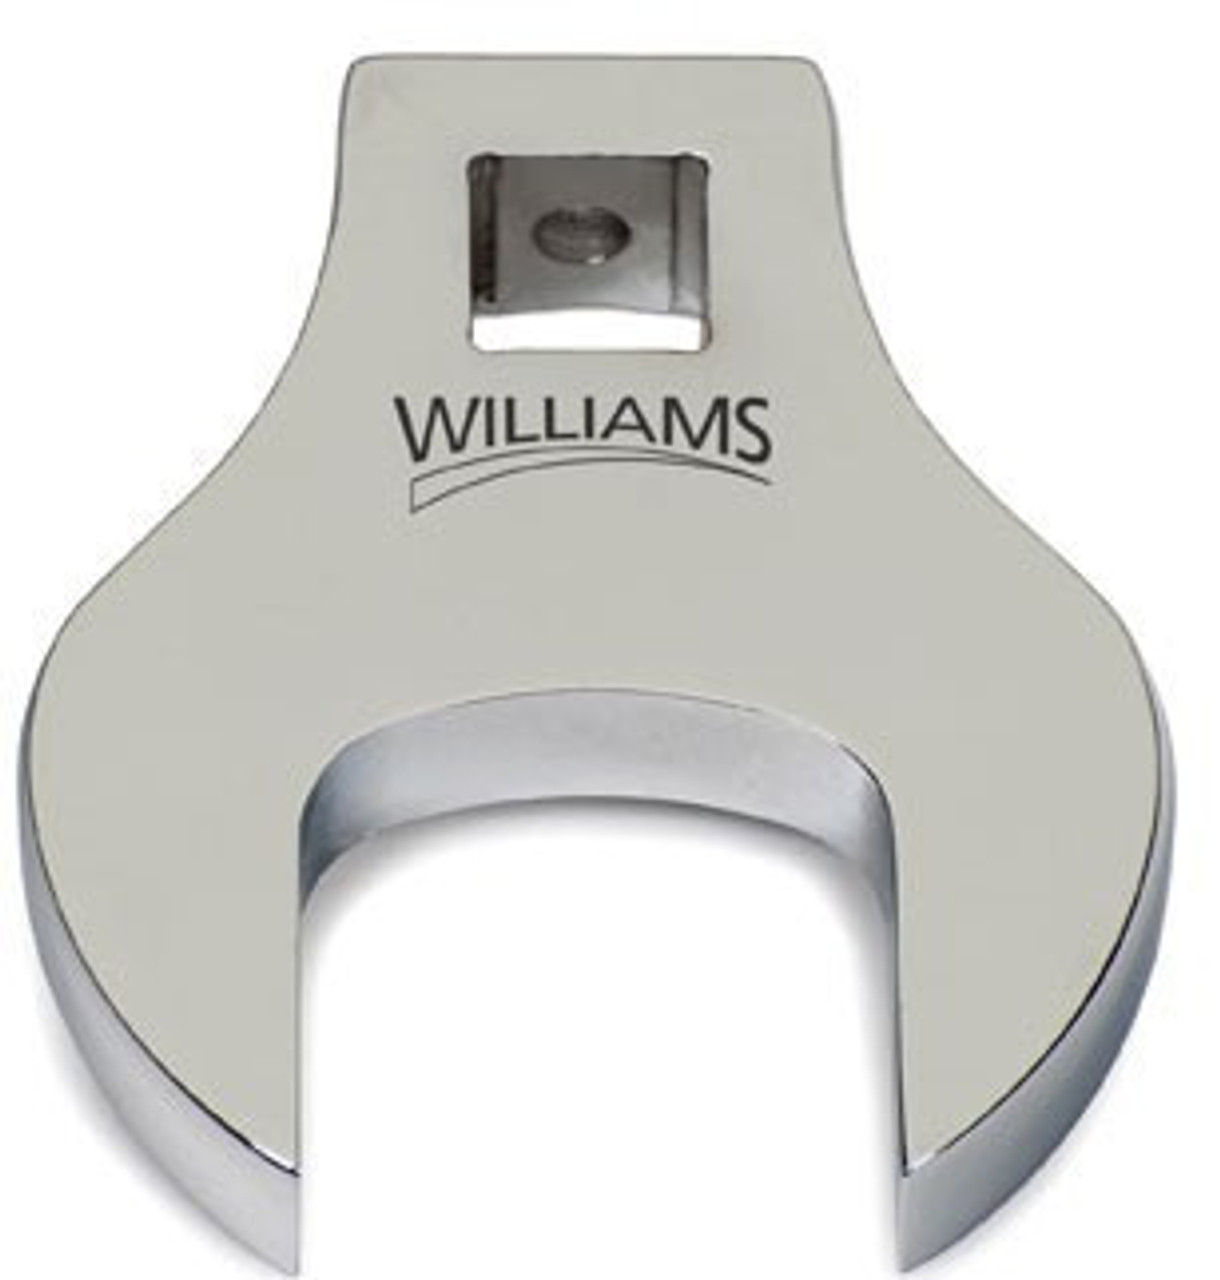 Williams 1 1/2 Williams 3/8 Drive Crowfoot Wrench - 10718